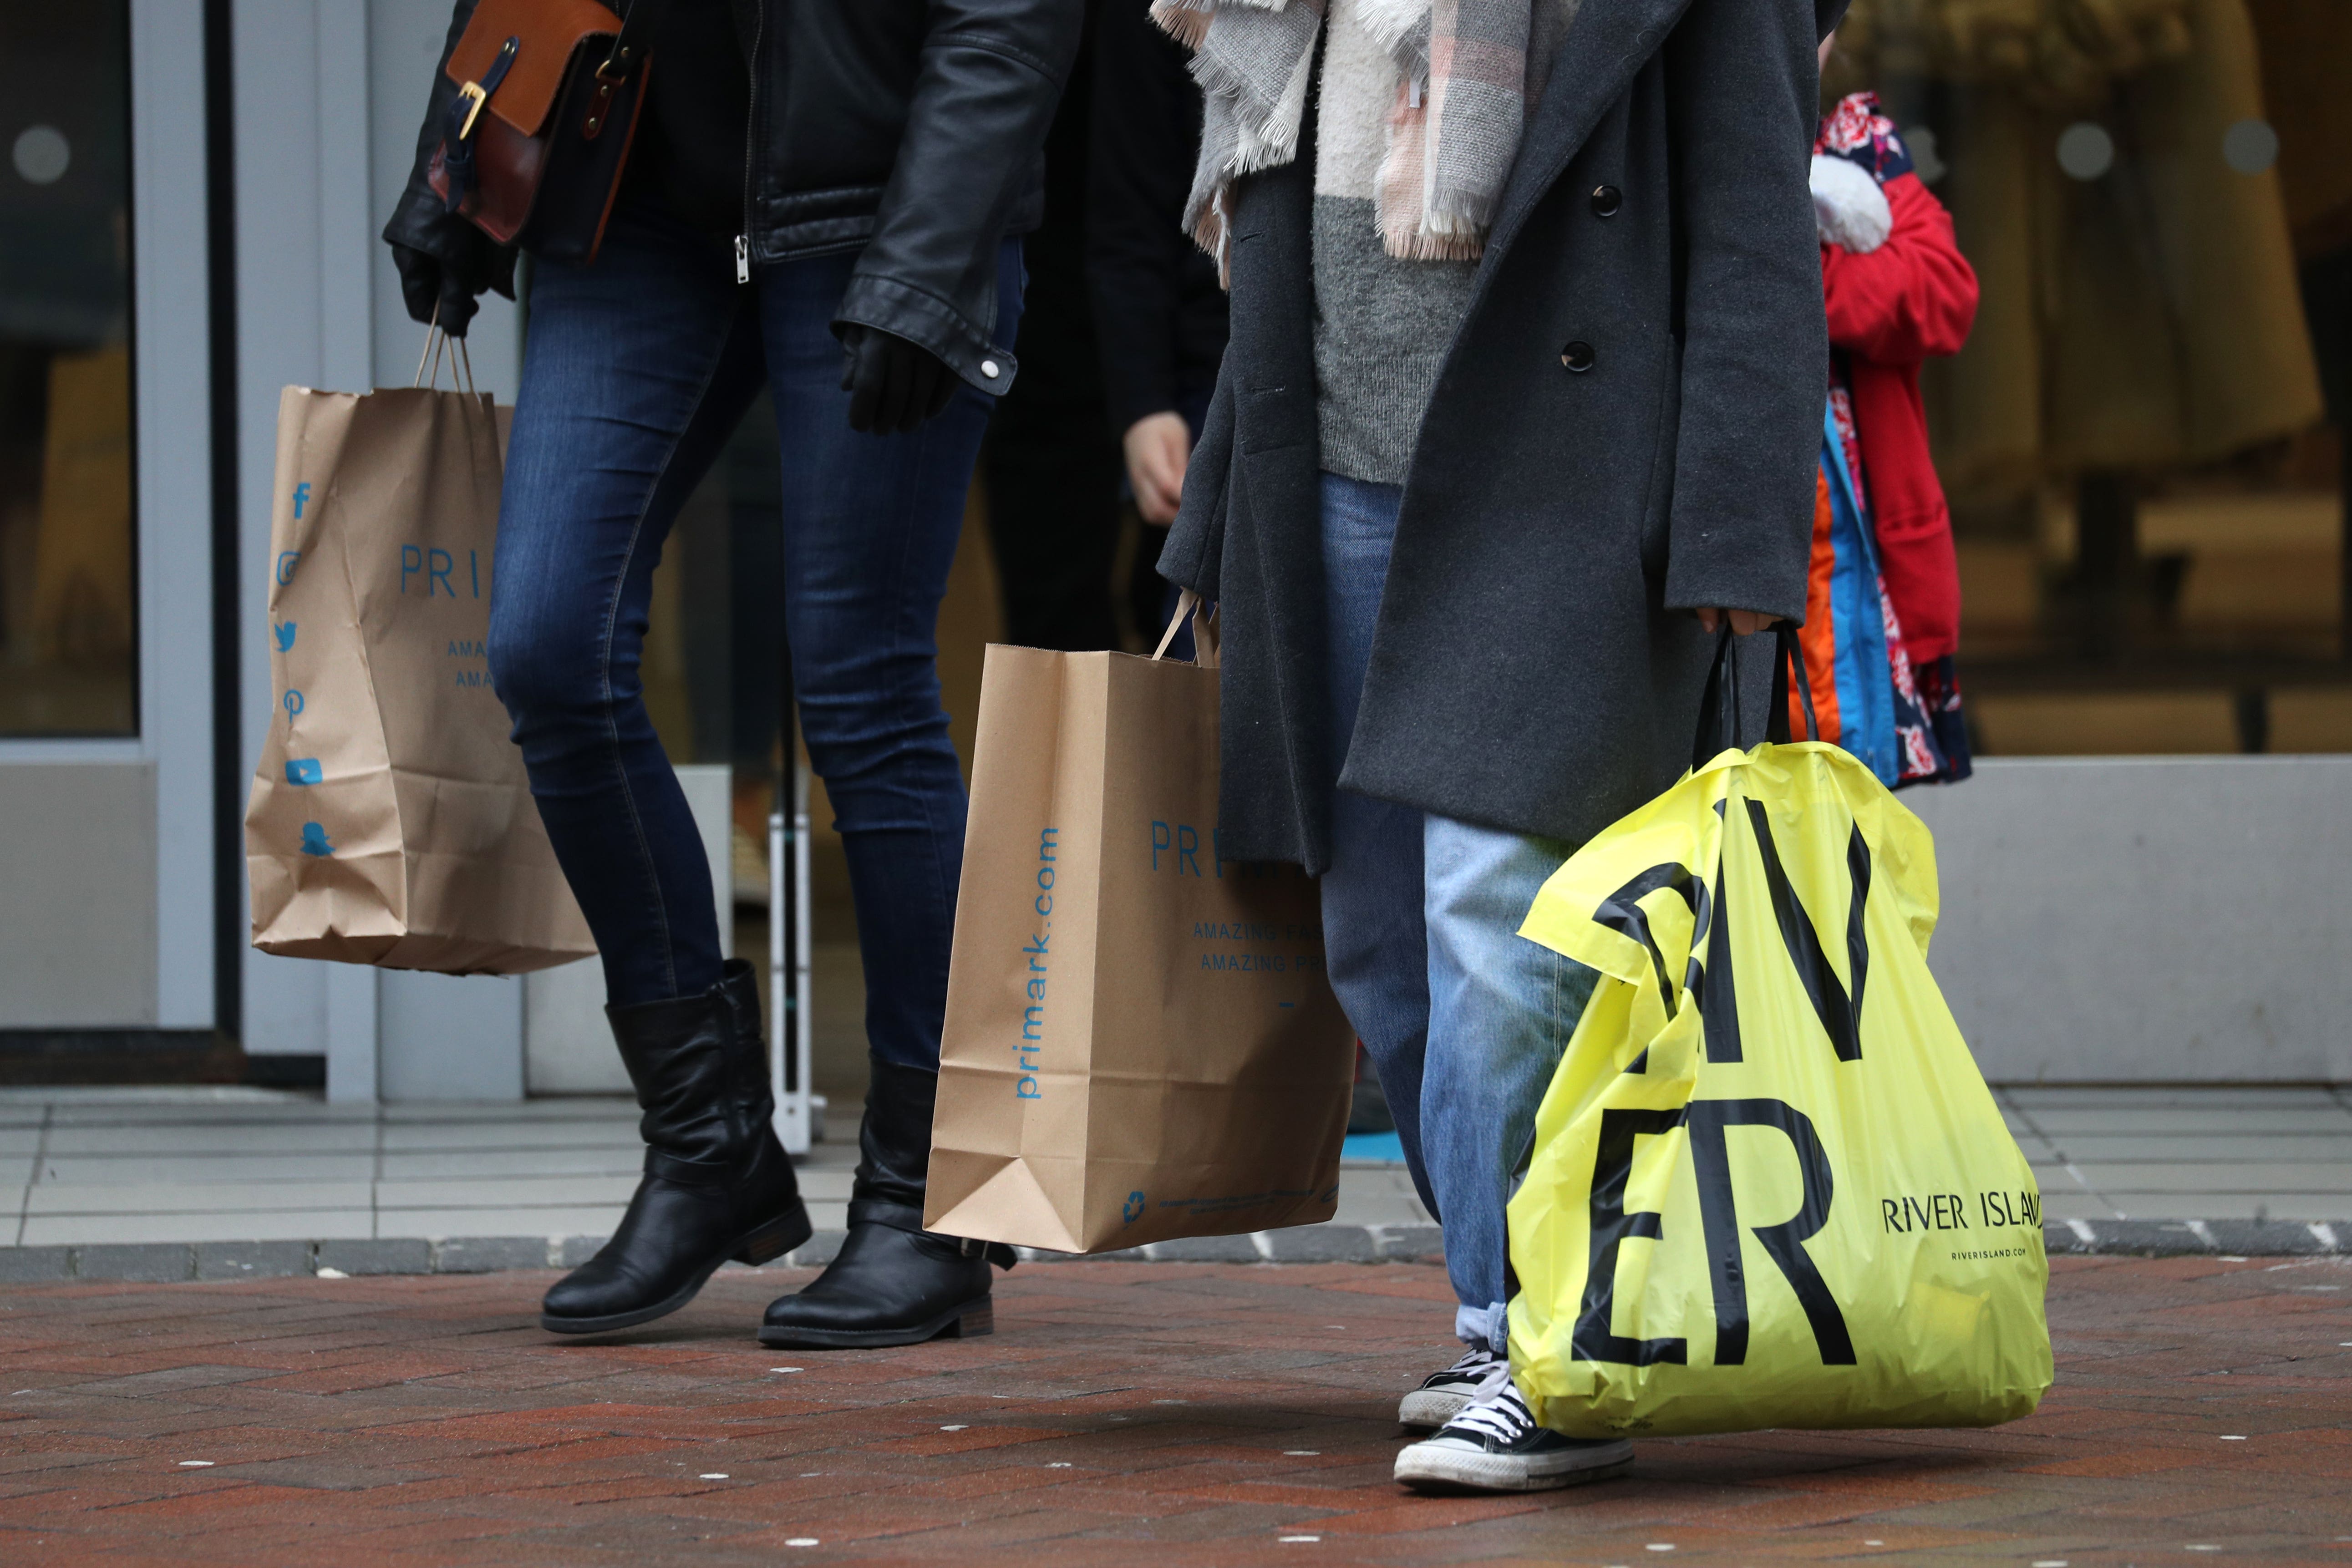 The major purchase index, an indicator of confidence in buying big ticket items, is down seven points to minus 32 (PA)